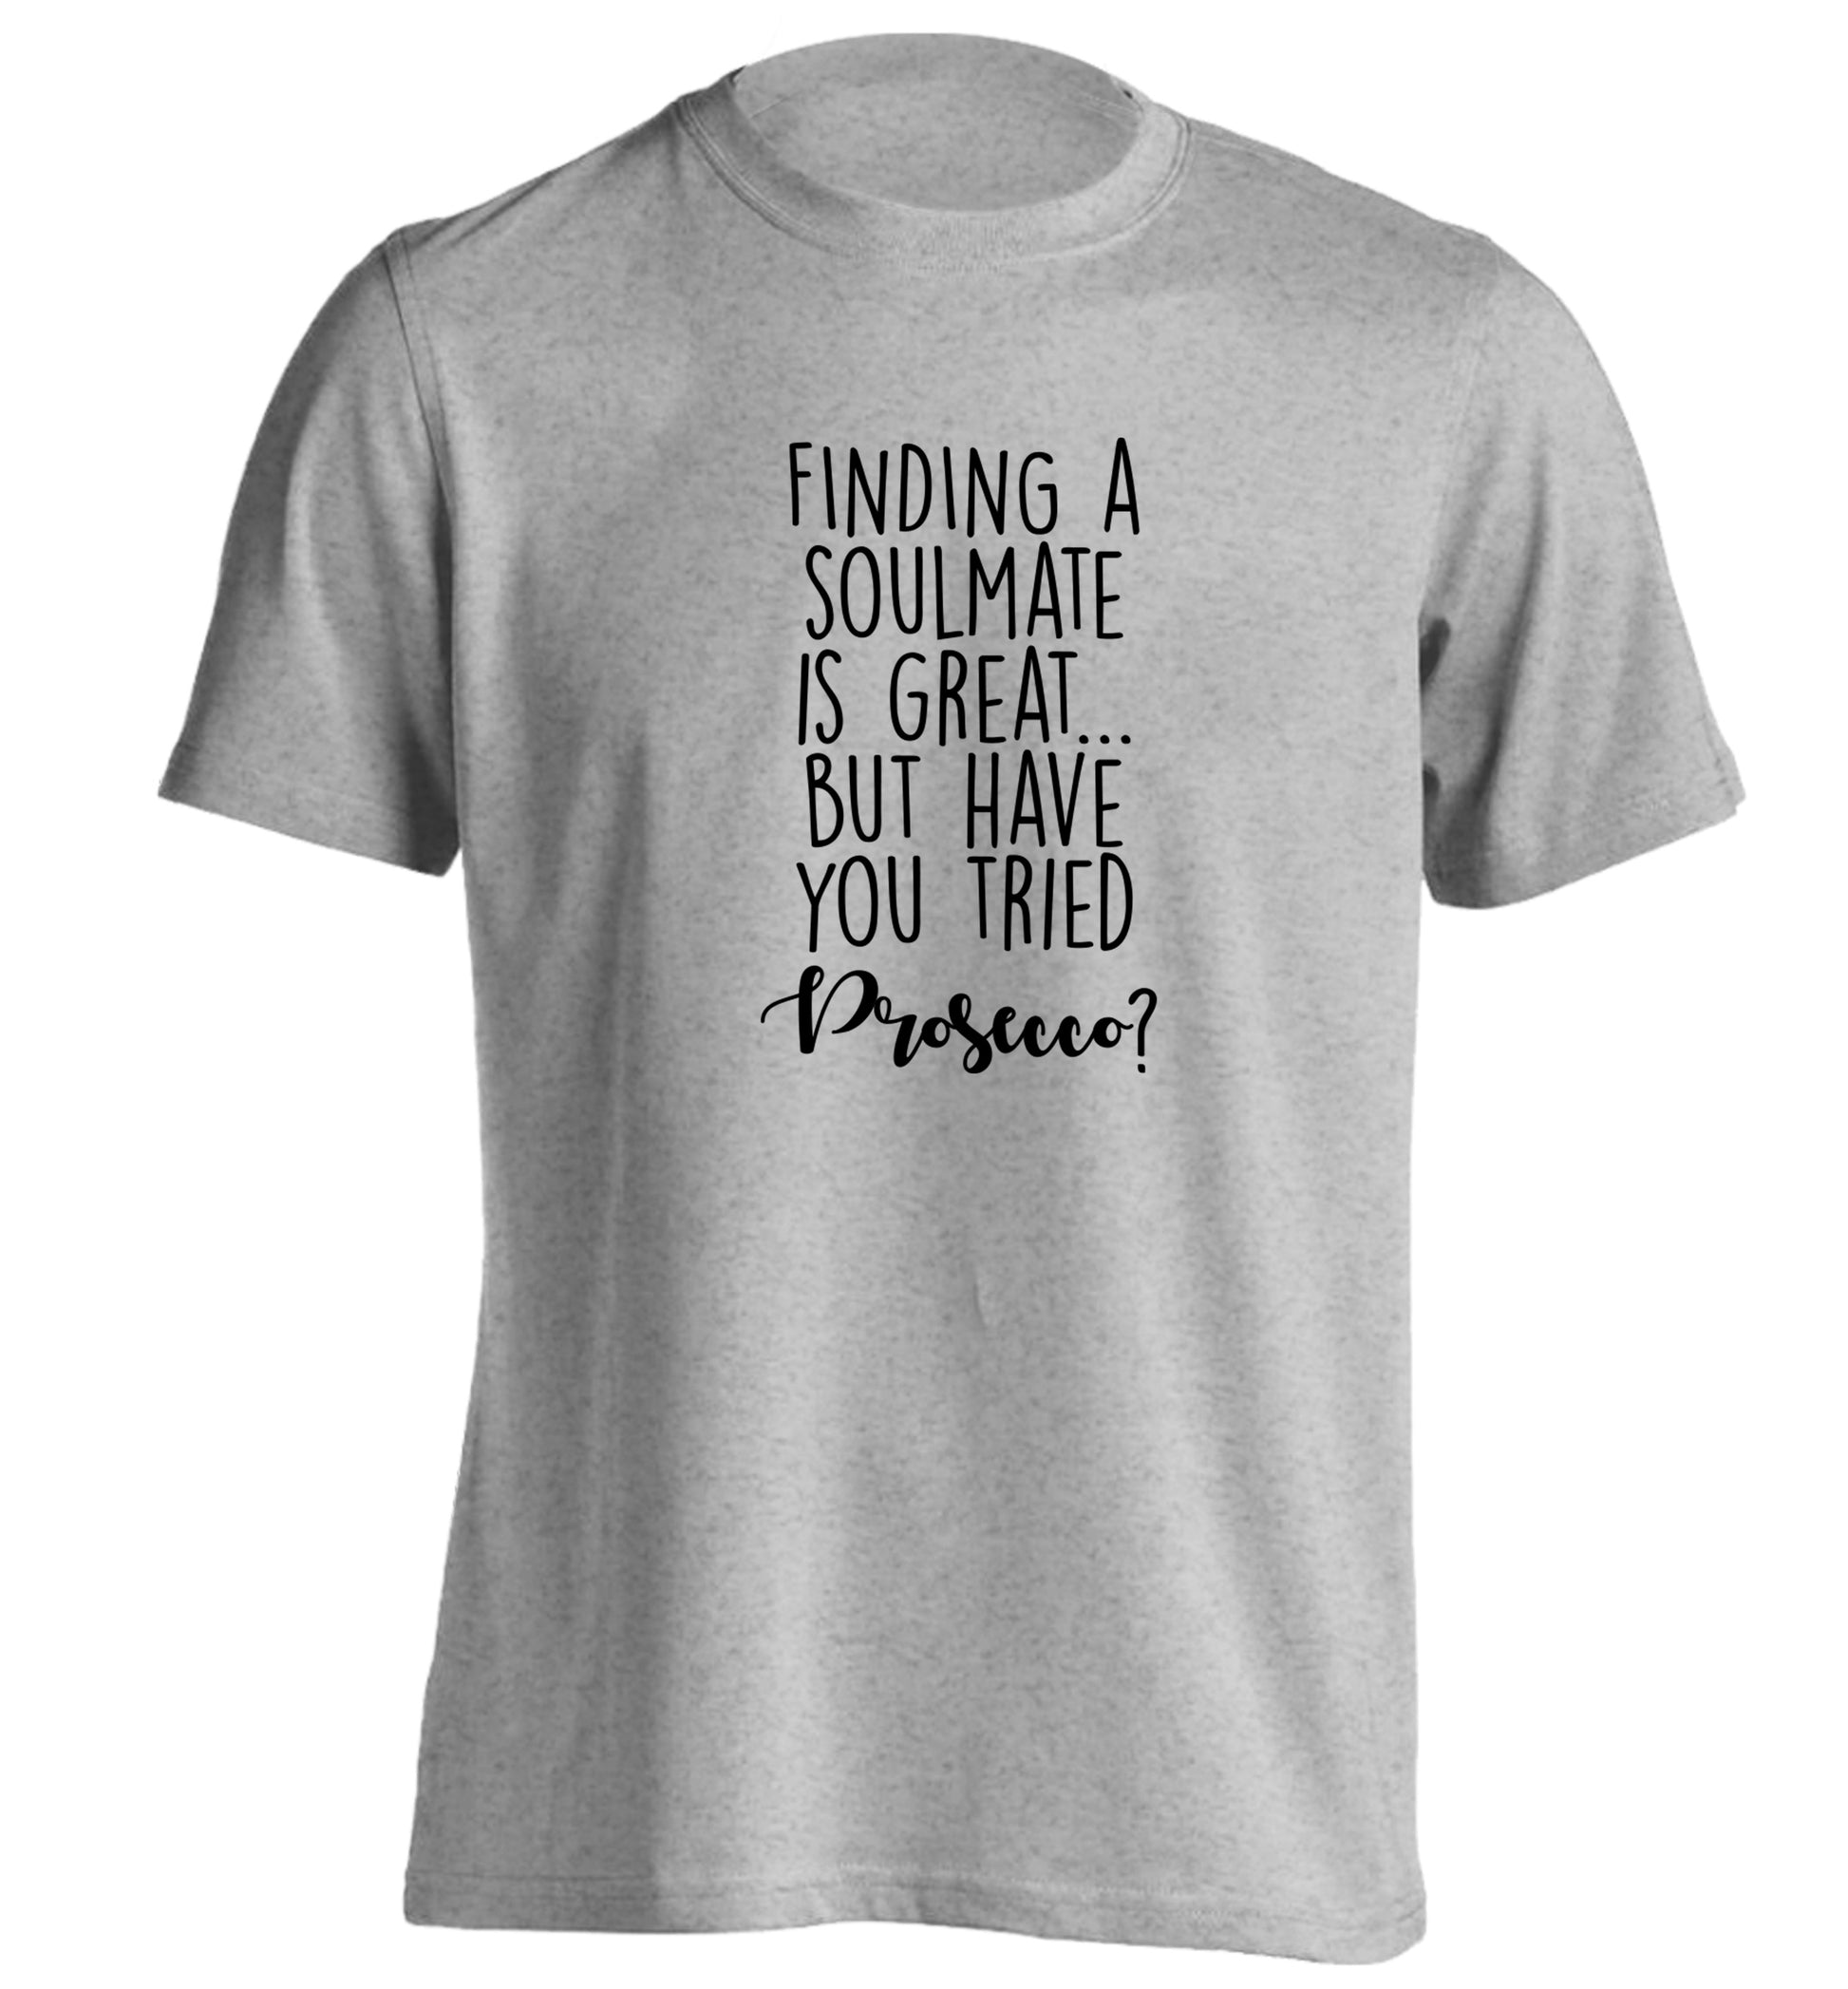 Finding a soulmate is great but have you tried prosecco? adults unisex grey Tshirt 2XL